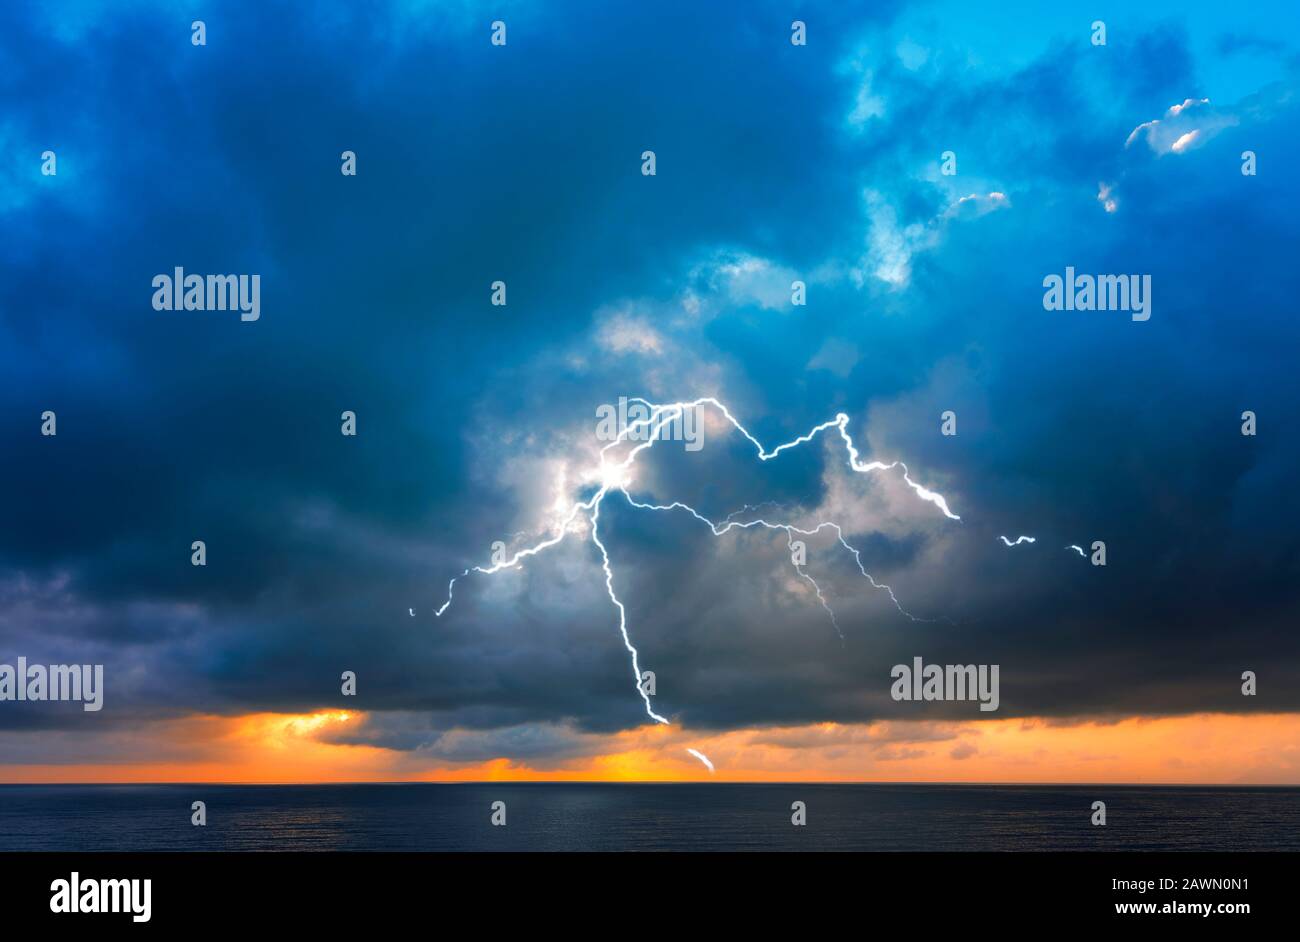 Sea before Storm, dramatic Sky over Sea, Thunderstorm with Lightning Stock Photo